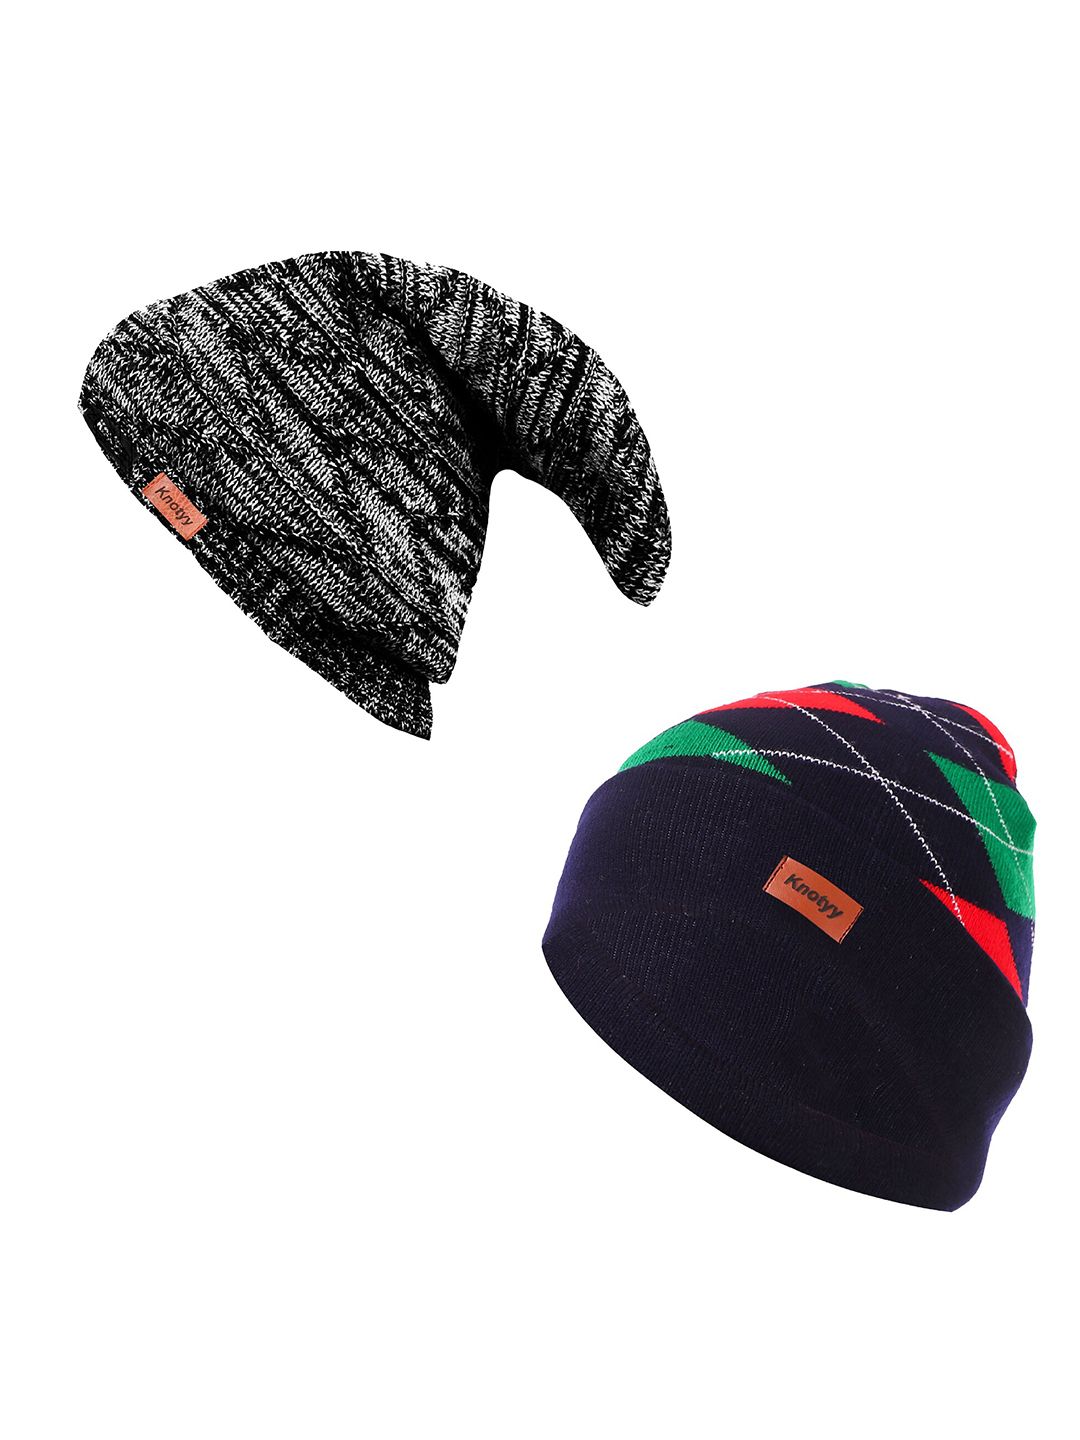 Knotyy Unisex Pack of 2 Black & Navy Blue Printed Beanie Price in India